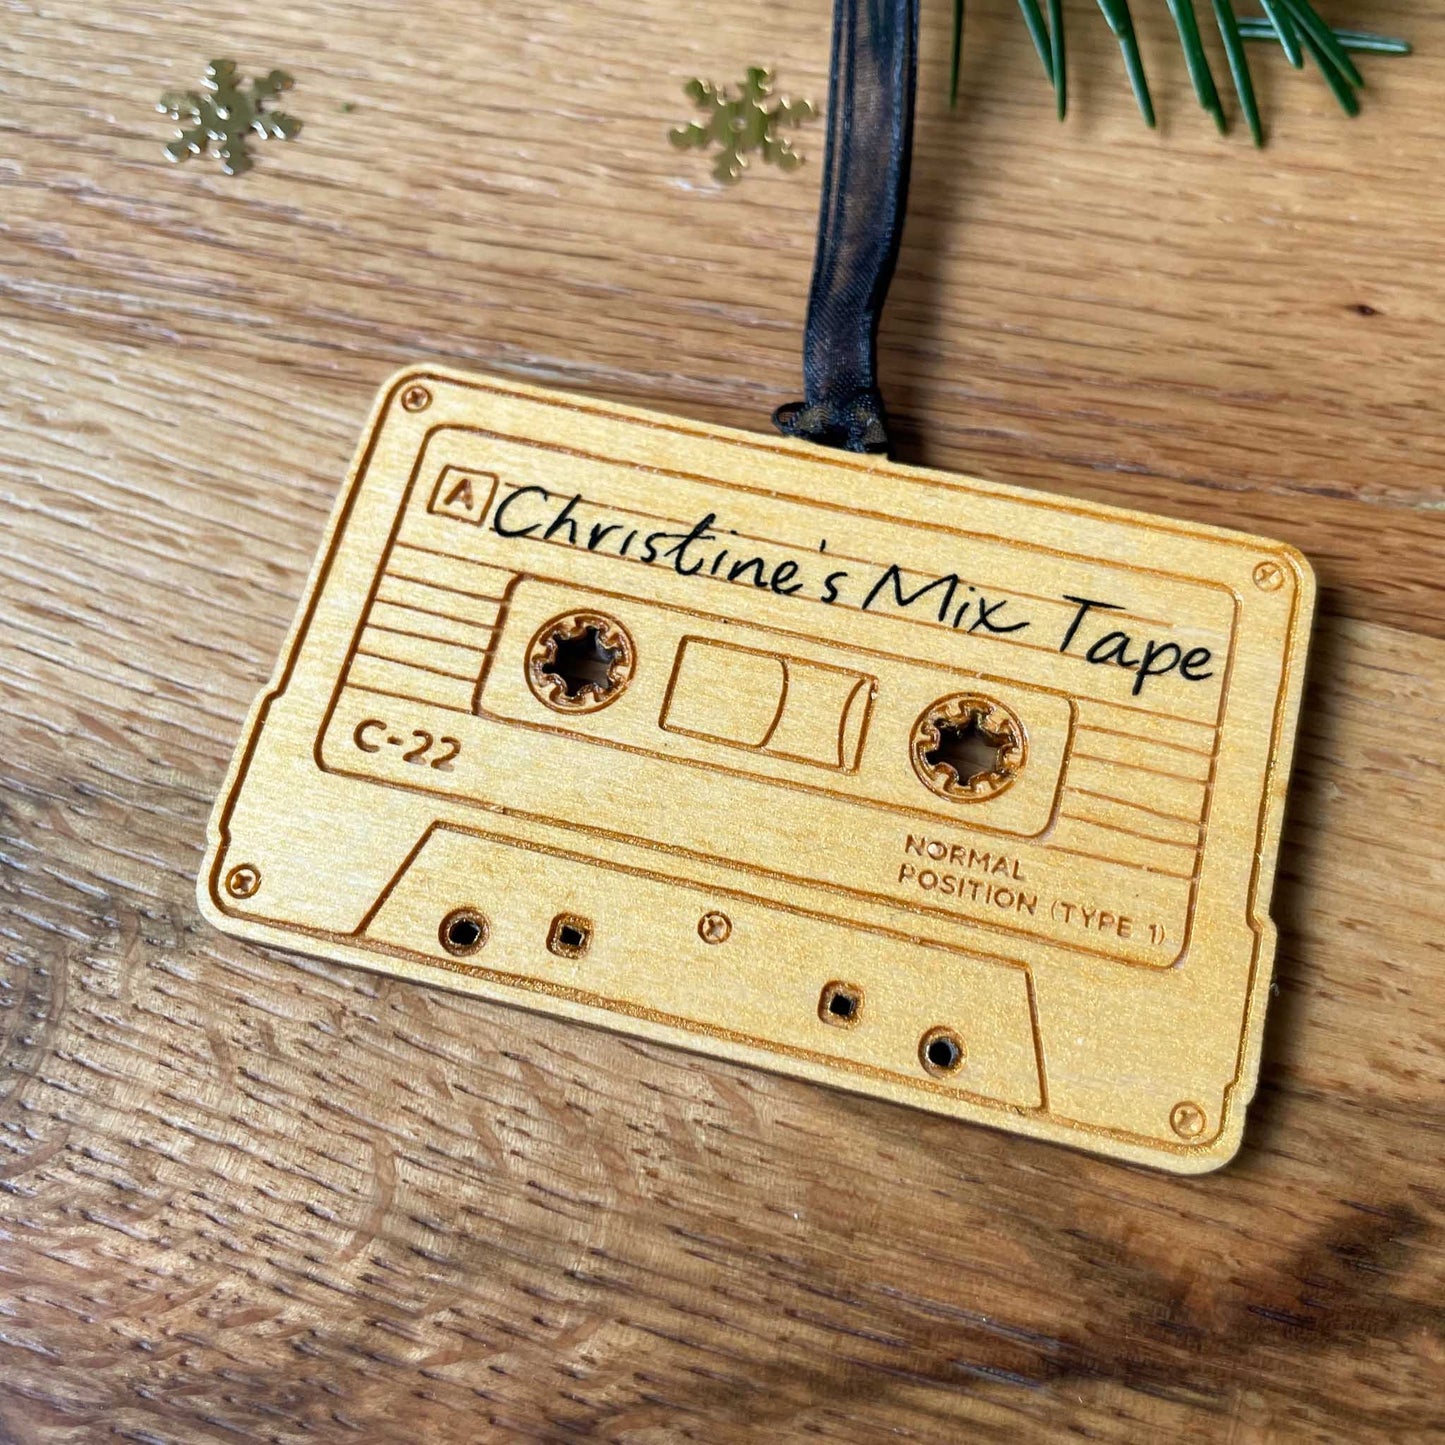 Personalised Mix Tape Cassette Decoration & Greeting Card